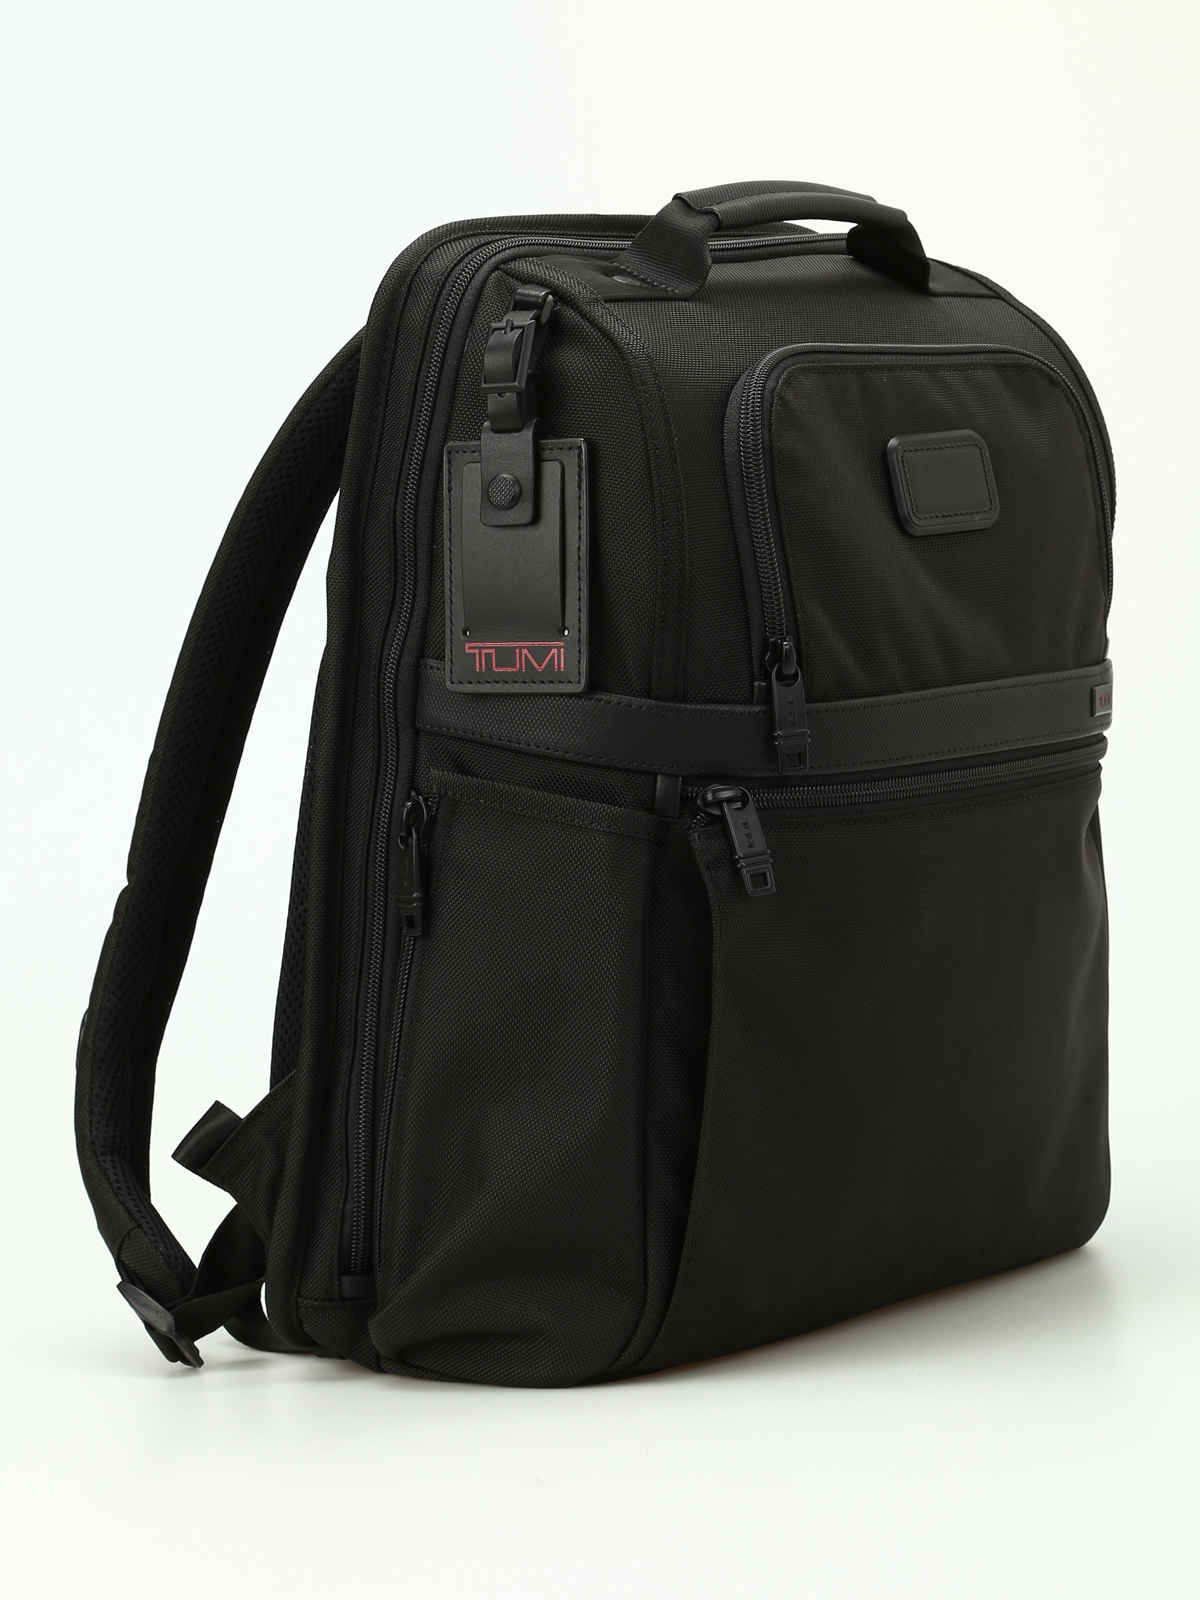 Alpha 2 T-Pass backpack by Tumi - backpacks | Shop online at iKRIX.com ...